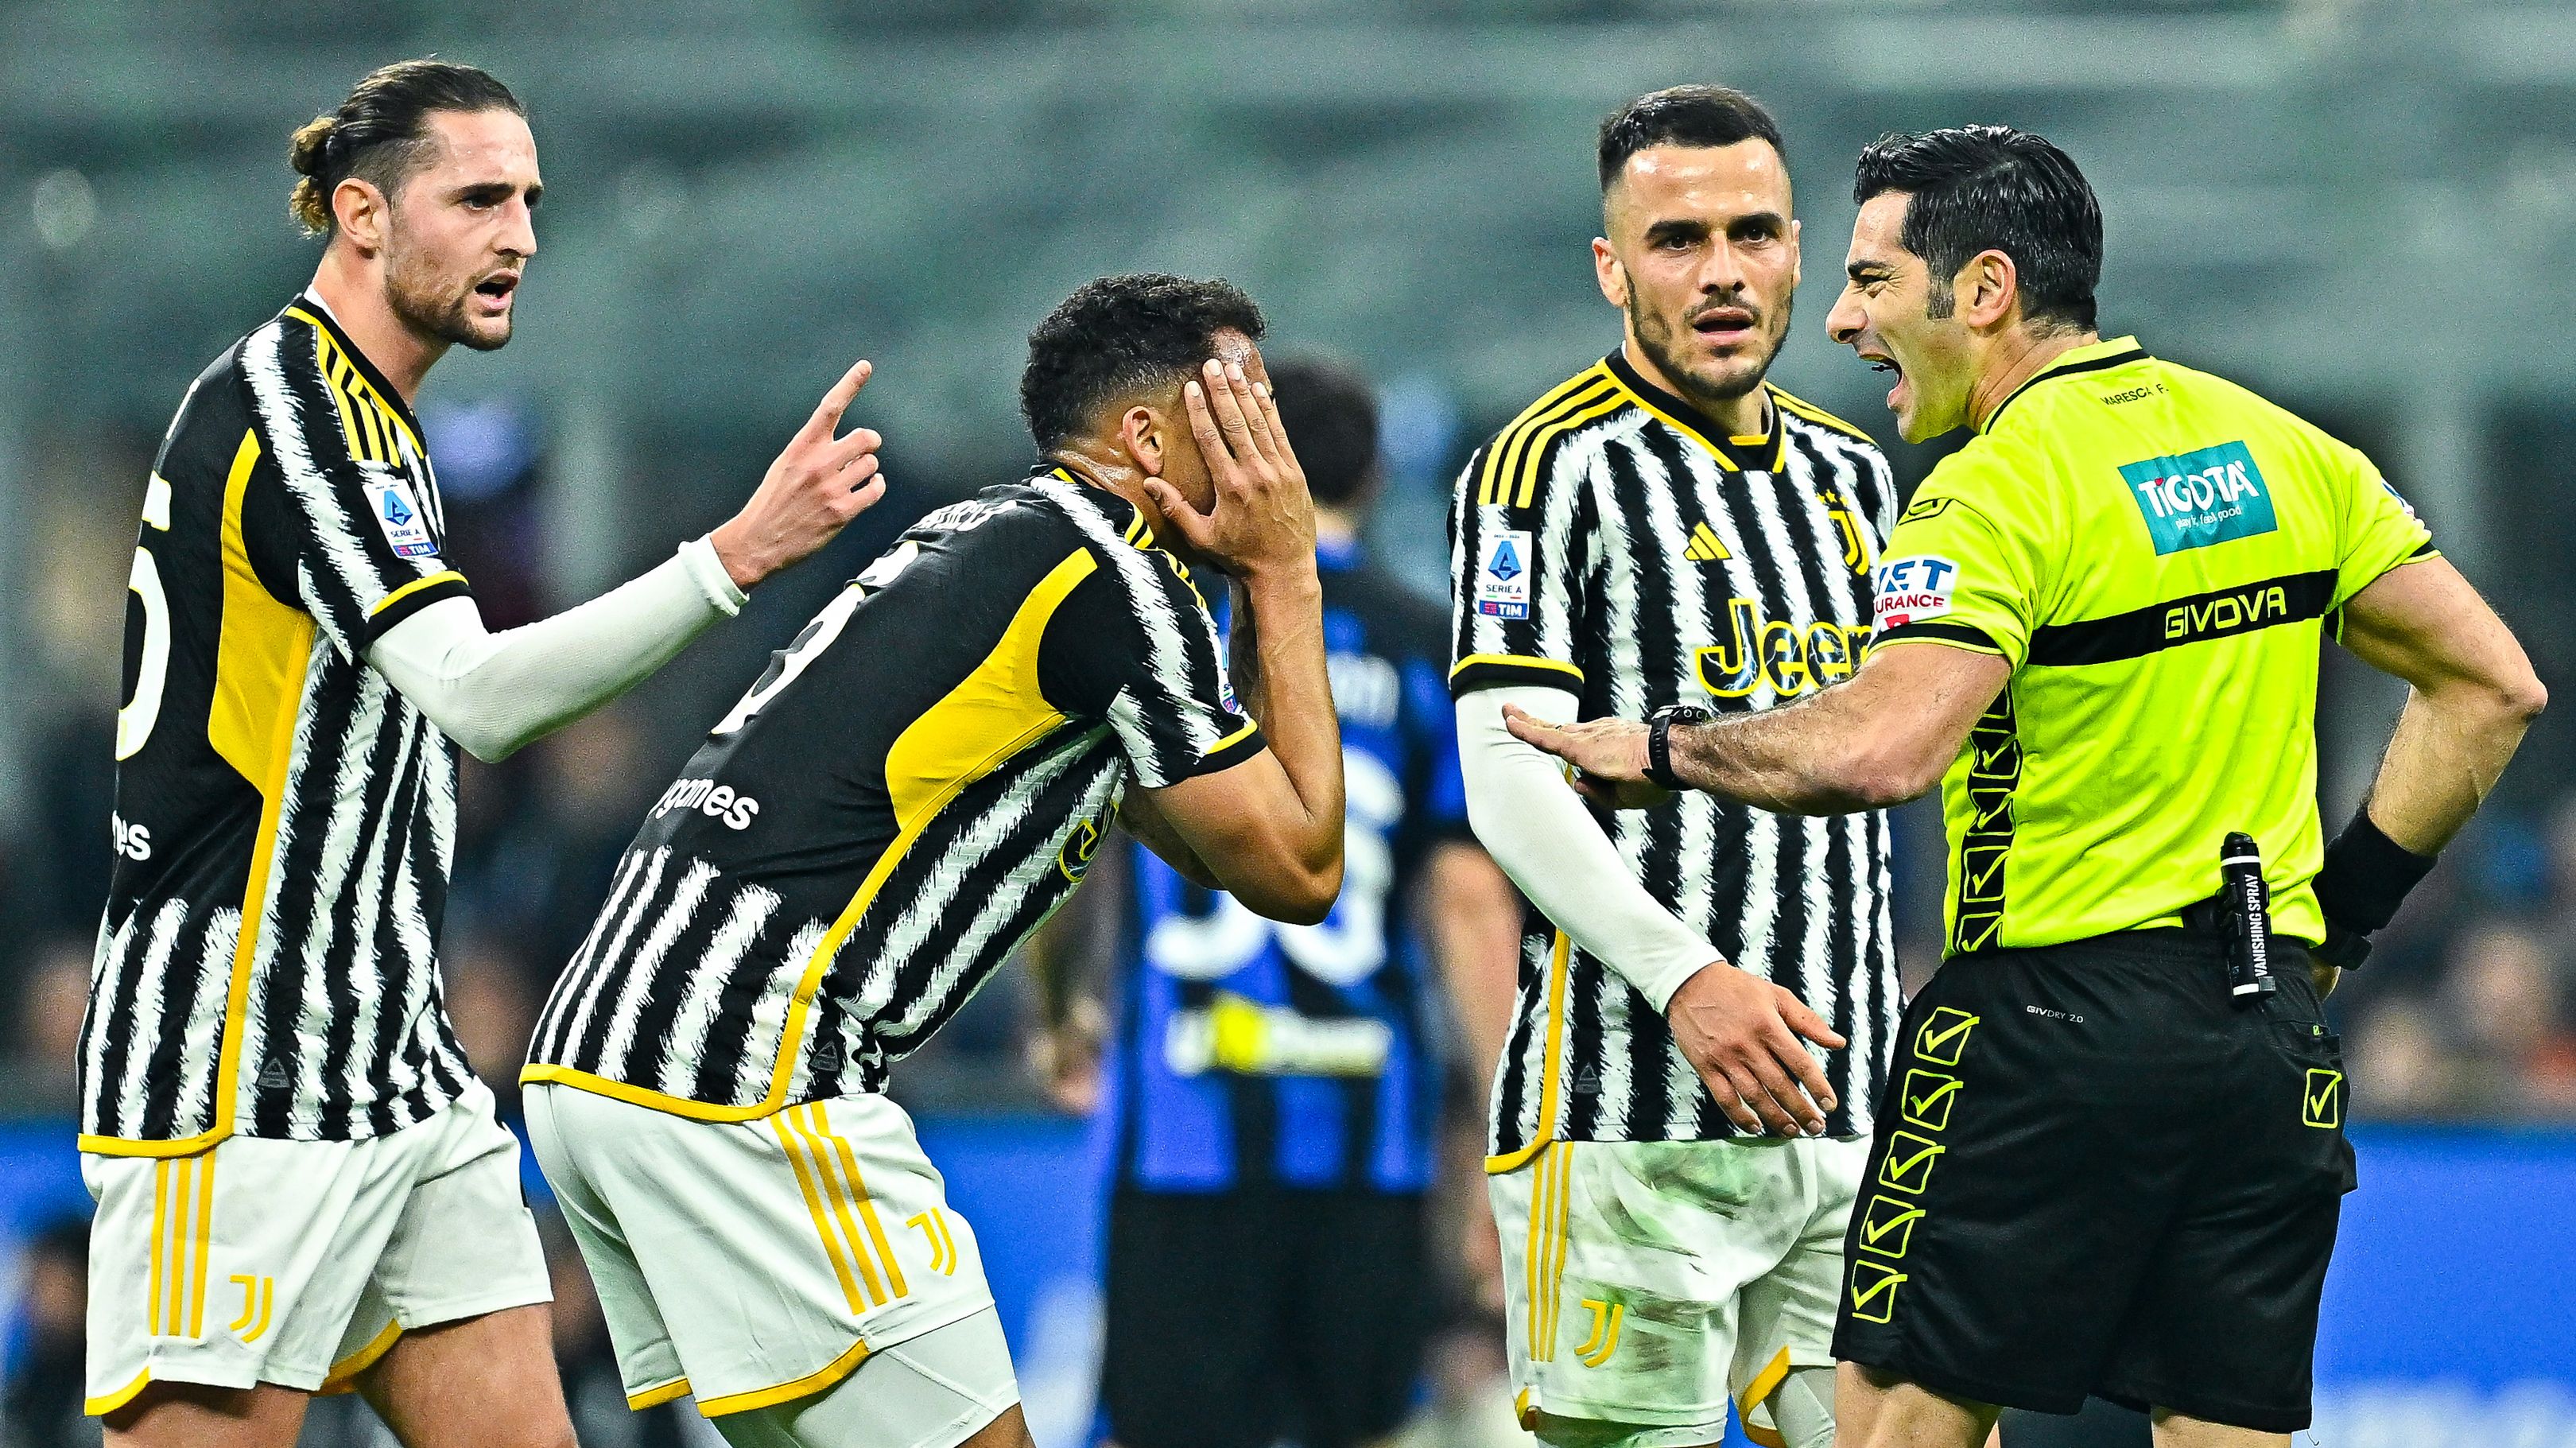 Luiz Danilo of Juventus (second from left) complains with referee Fabio Maresca after being shown a yellow card during the Serie A match between FC Internazionale and Juventus.